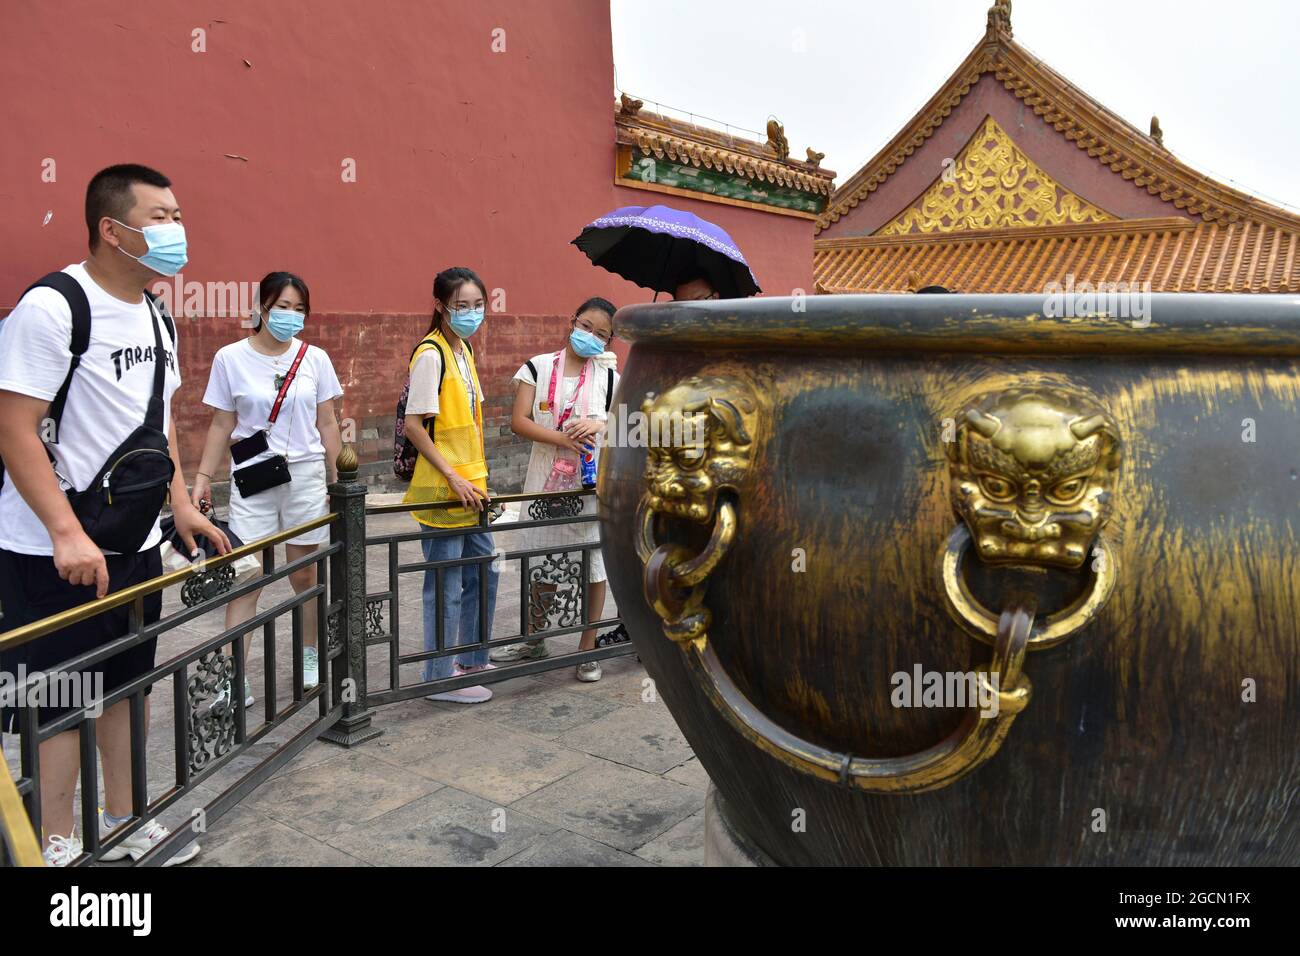 Beijing, China. 8th Aug, 2021. People wearing face masks as a preventive measure against the spread of covid-19 are seen at the Forbidden City in Beijing.President Xi Jinping said on Thursday that China will provide a total of 2 billion doses of COVID-19 vaccines to the world this year, in the latest effort to honor its commitment to make vaccines a global public good by ensuring vaccine accessibility and affordability. (Credit Image: © Sheldon Cooper/SOPA Images via ZUMA Press Wire) Stock Photo